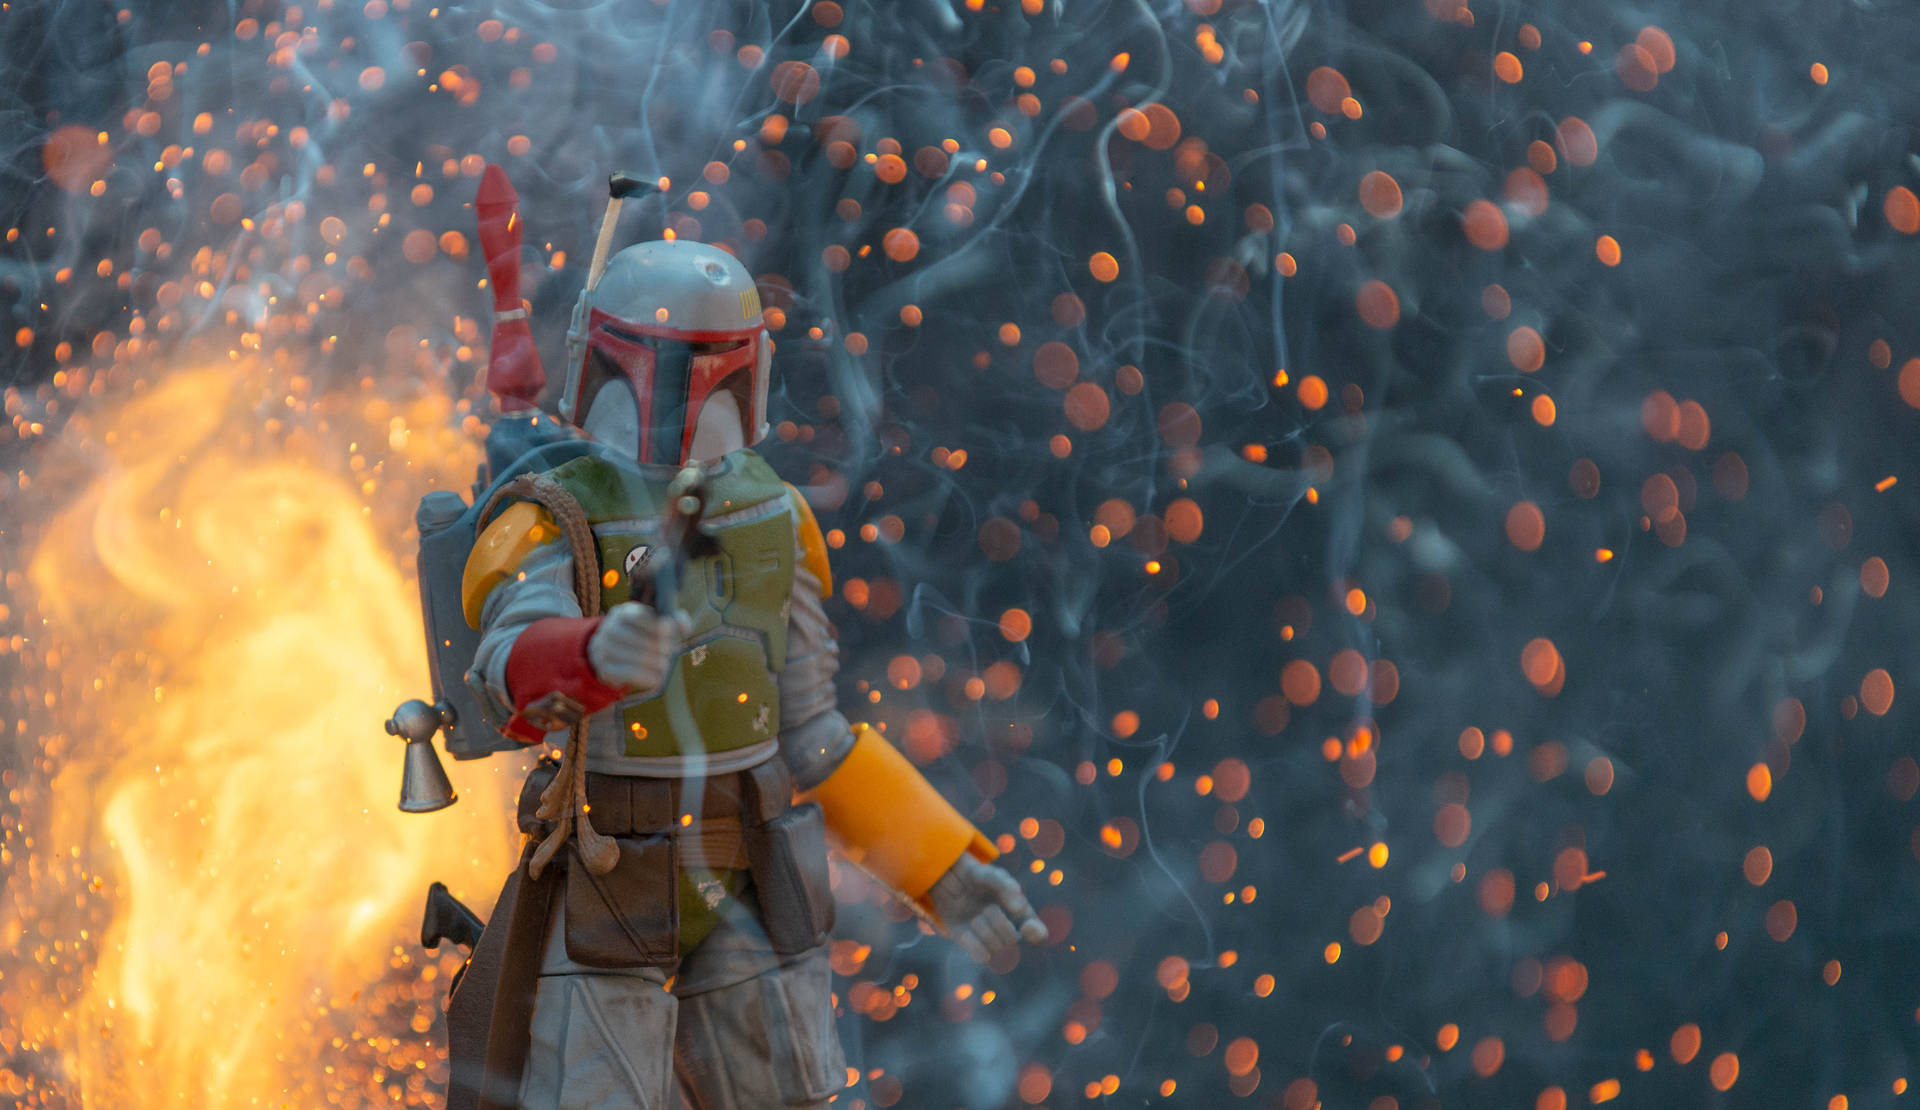 Boba Fett 5307X3069 Wallpaper and Background Image